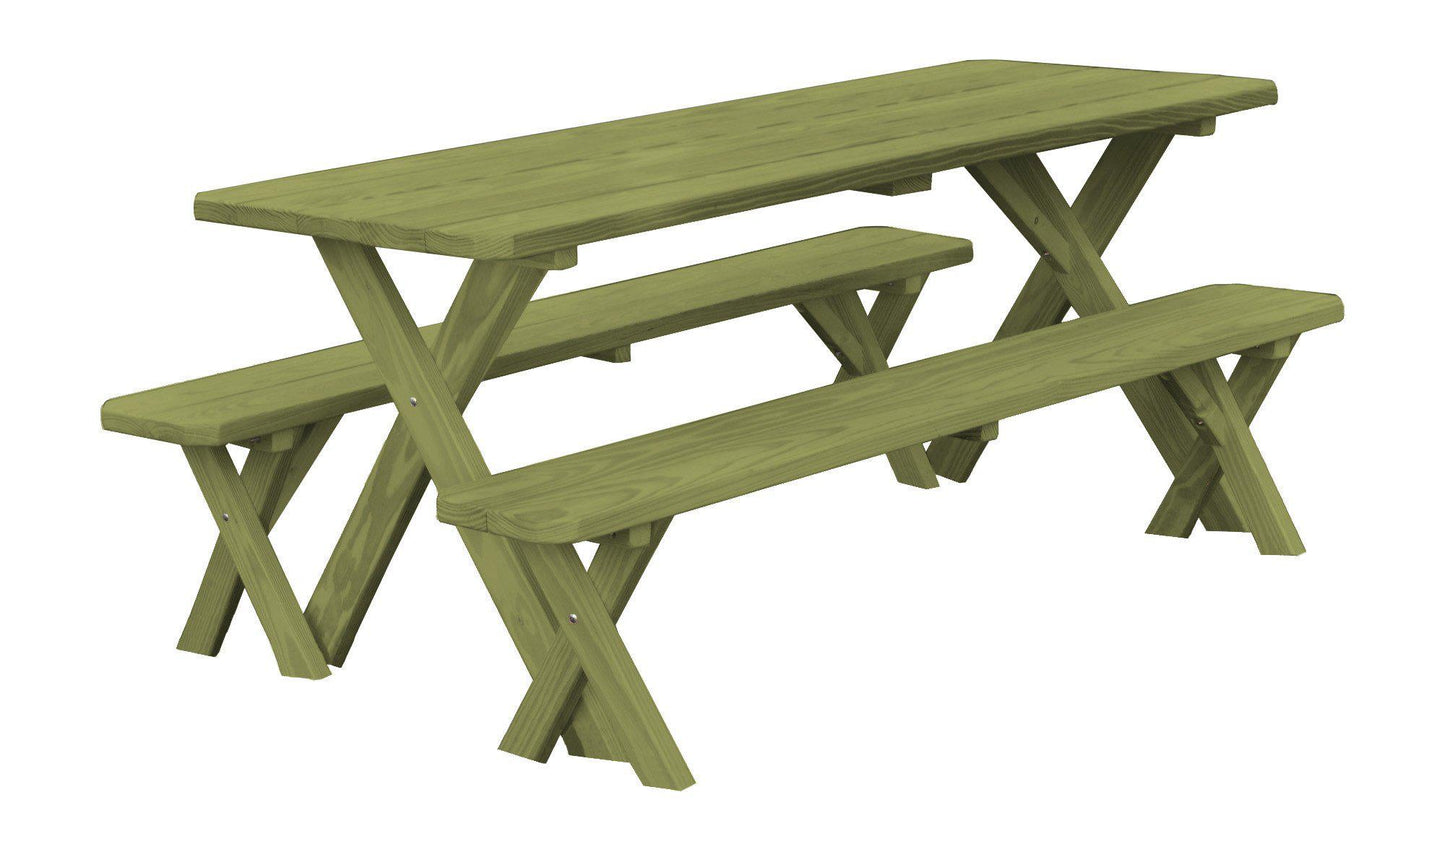 A&L Furniture Co. Pressure Treated Pine 6' Cross-leg Table w/2 Benches - LEAD TIME TO SHIP 10 BUSINESS DAYS